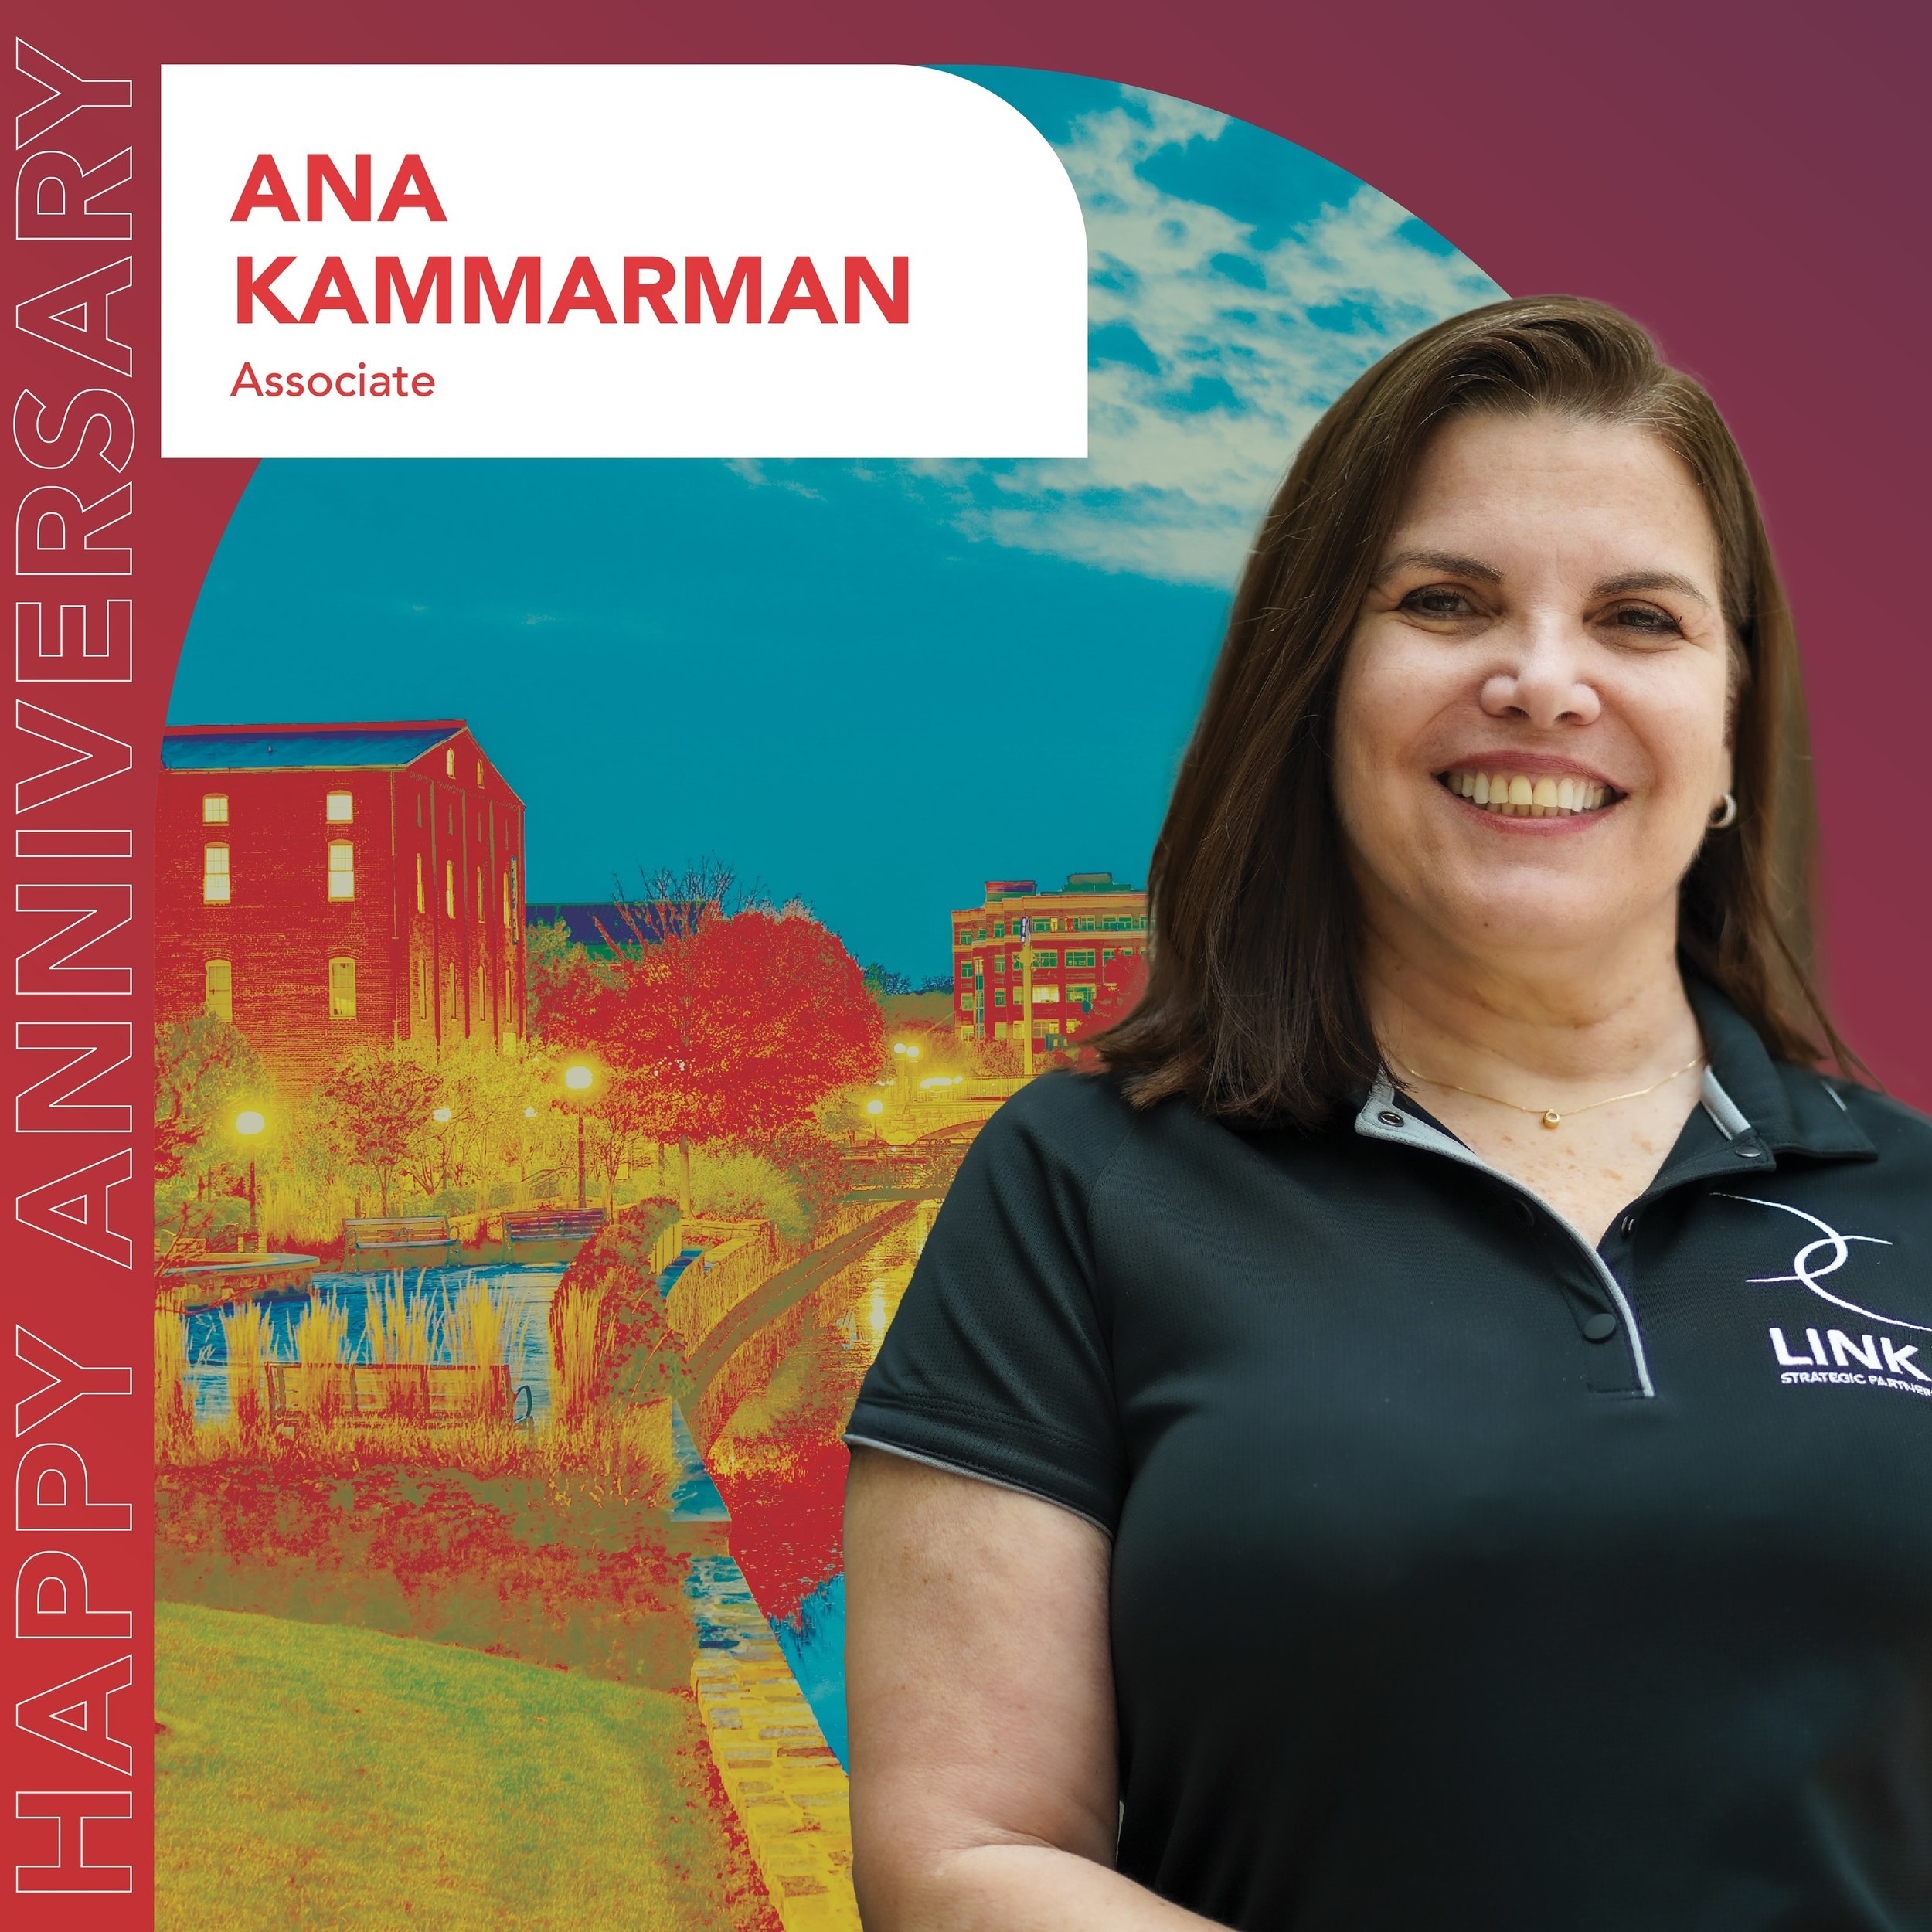 Happy two-year anniversary to our Associate Ana Kammarman! Ana came to LINK with a wealth of international business experience, and embodies the concept of &lsquo;lifelong learning.&rsquo; Ana is proficient in three languages, and is an accomplished 